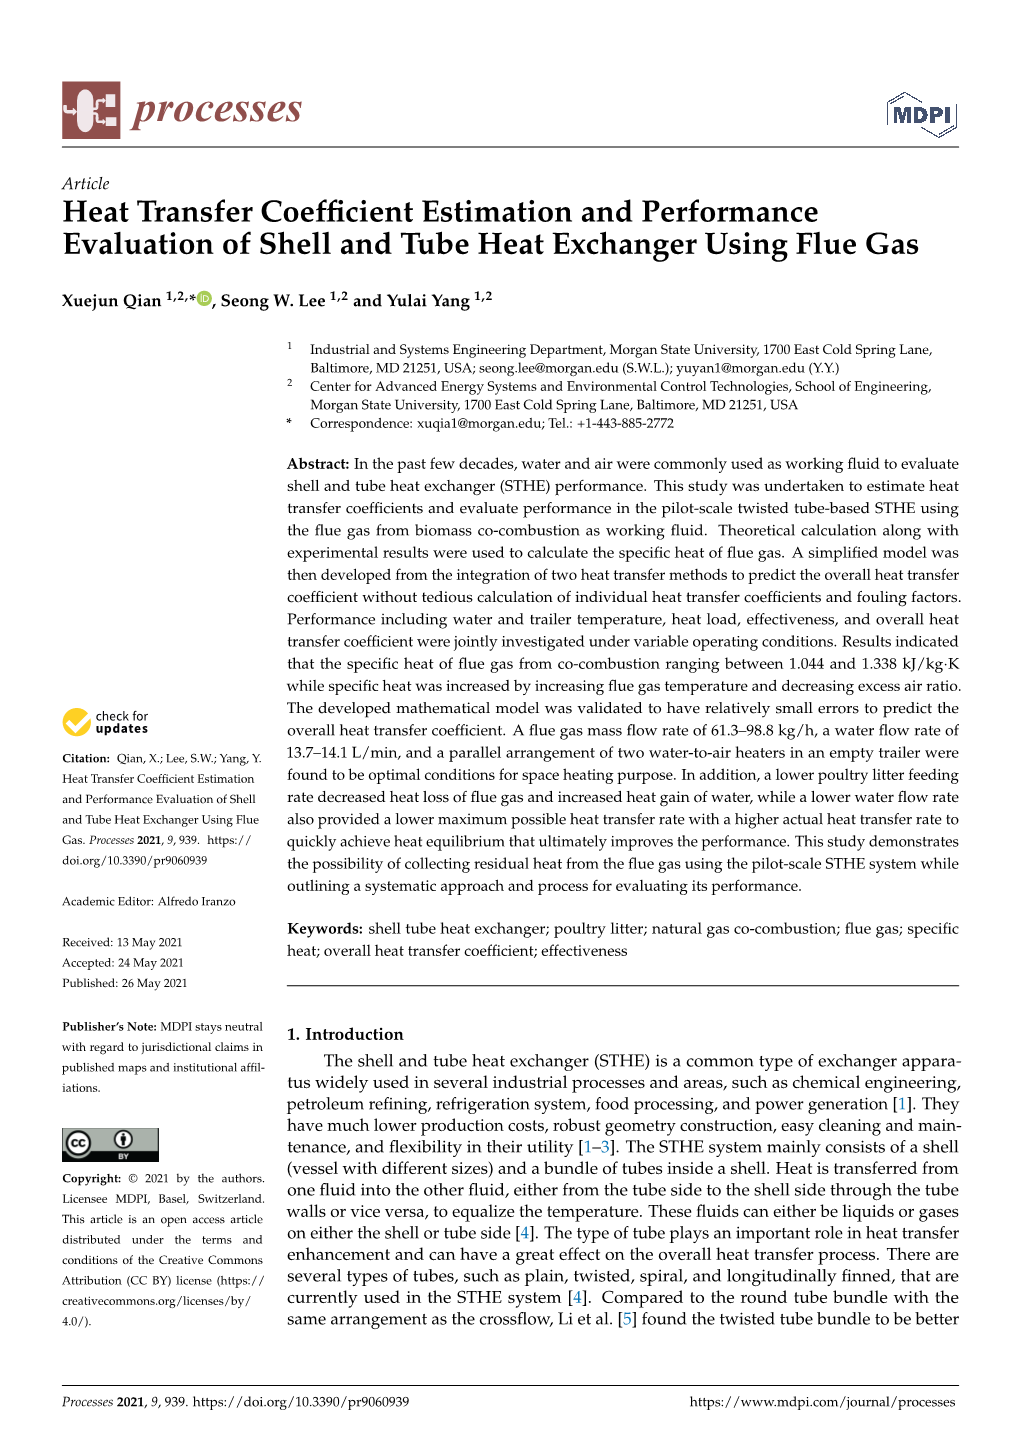 Heat Transfer Coefficient Estimation and Performance Evaluation Of